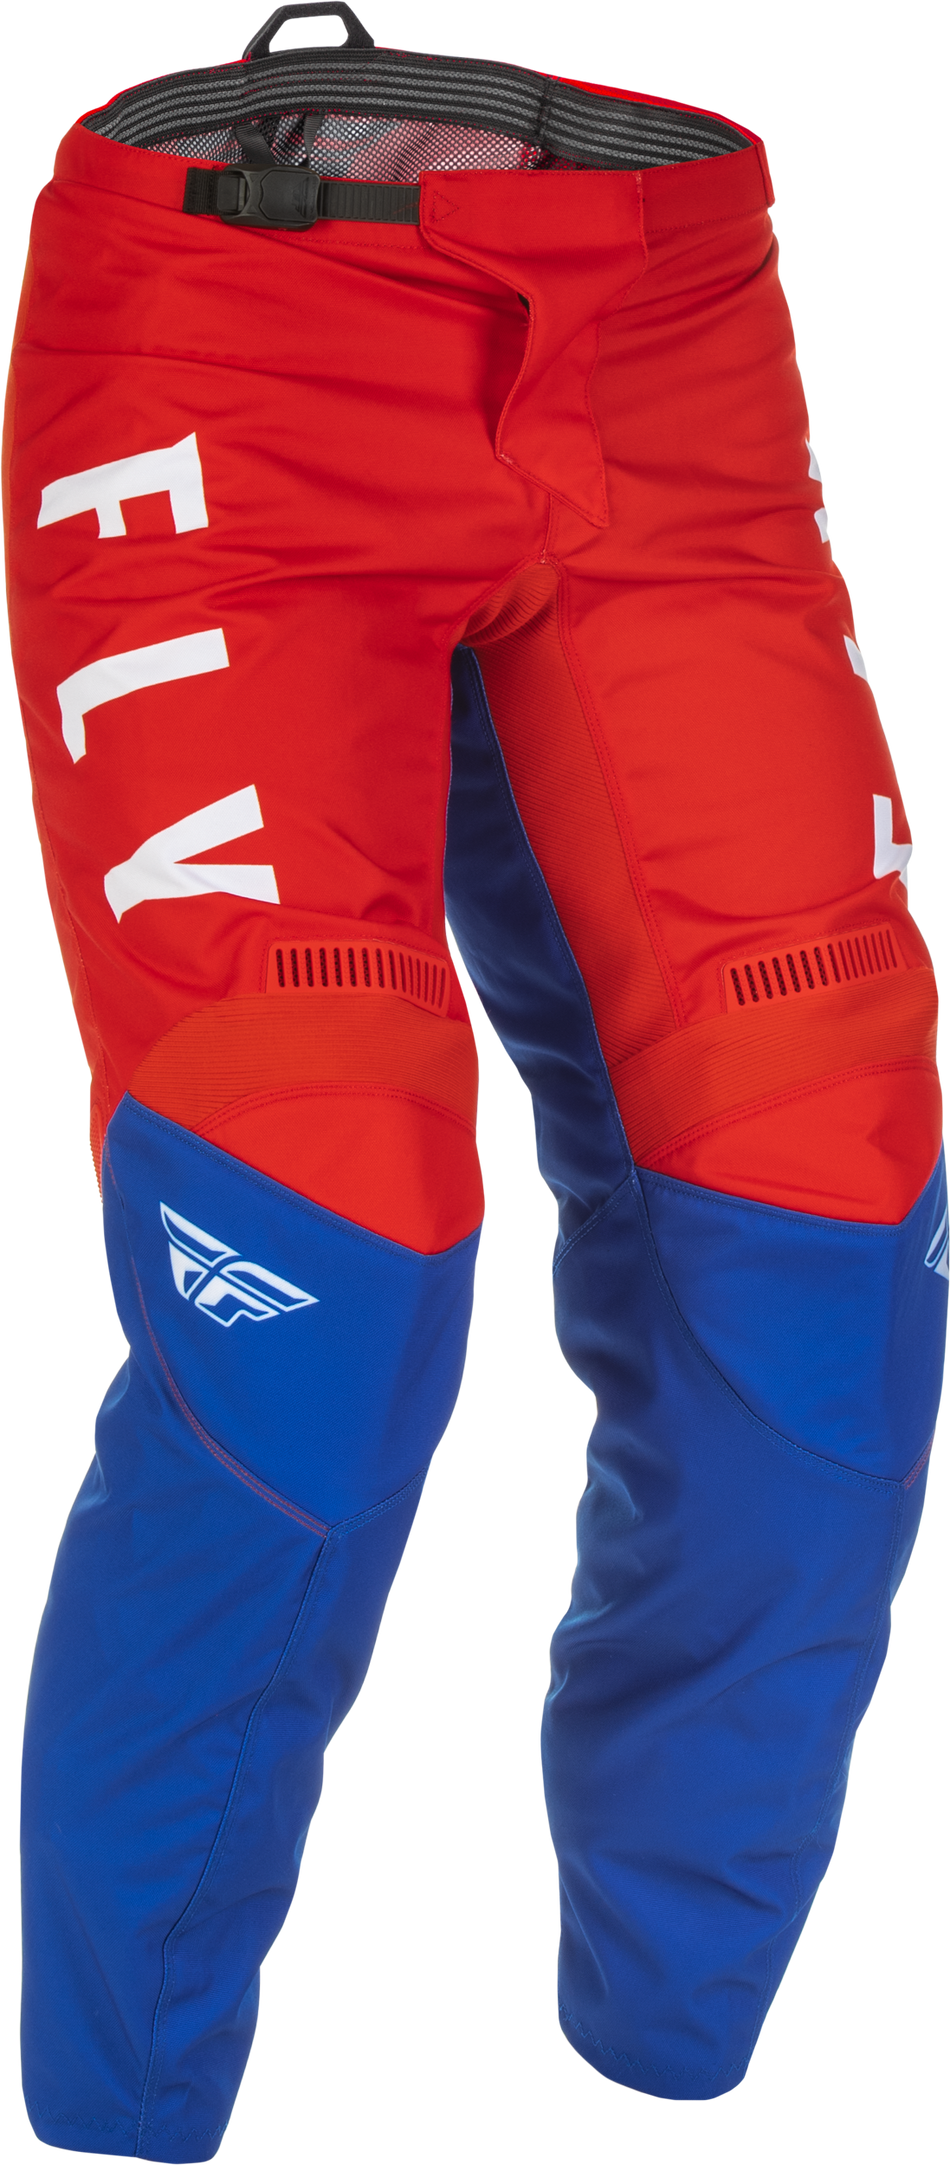 FLY RACING F-16 Pants Red/White/Blue Sz 28 375-93428